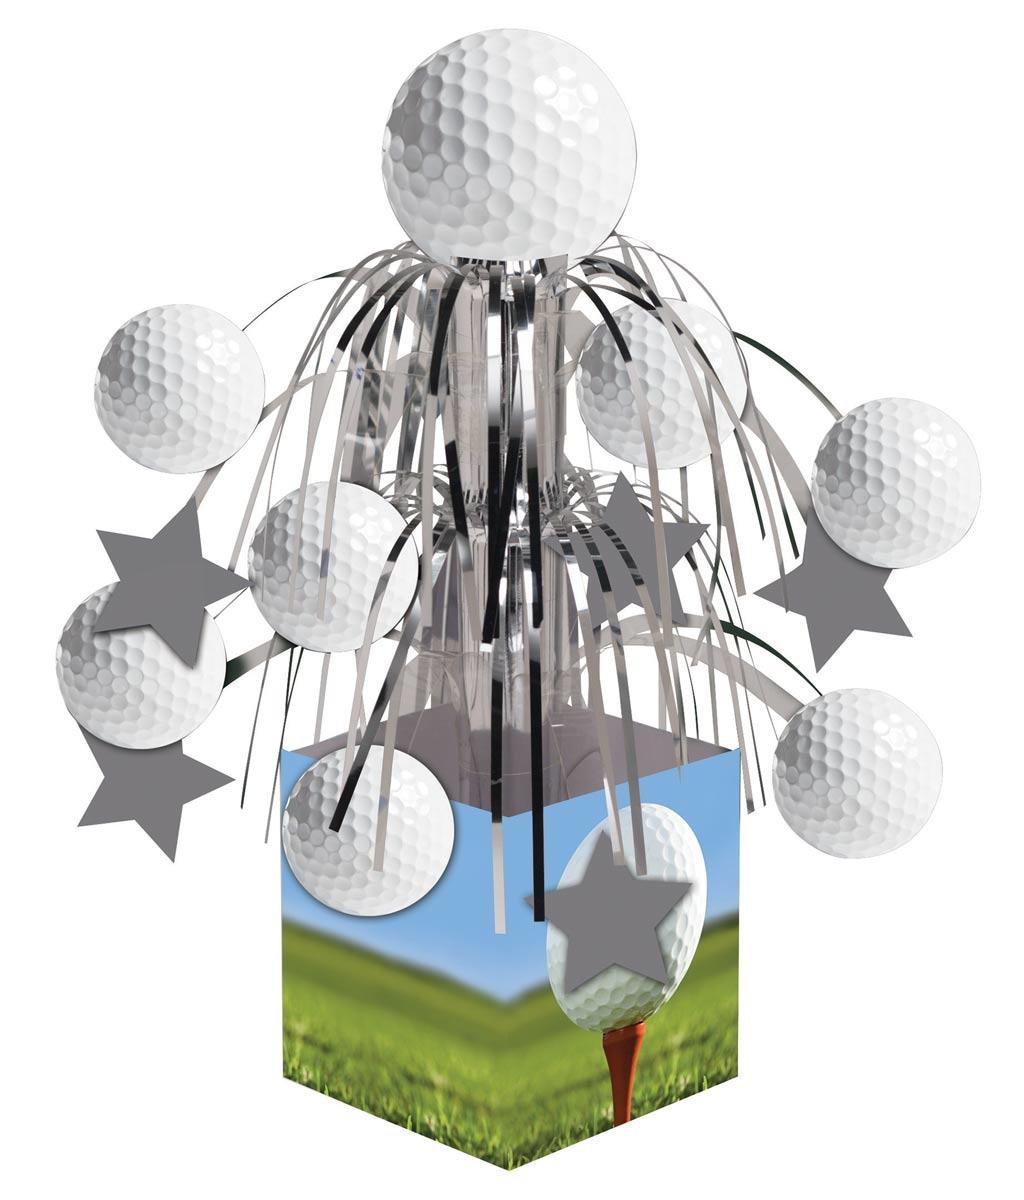 Sports Fanatic Golf Party Cascade Table Centrepiece by Creative Party 297965 available here at Karnival Costumes online party shop